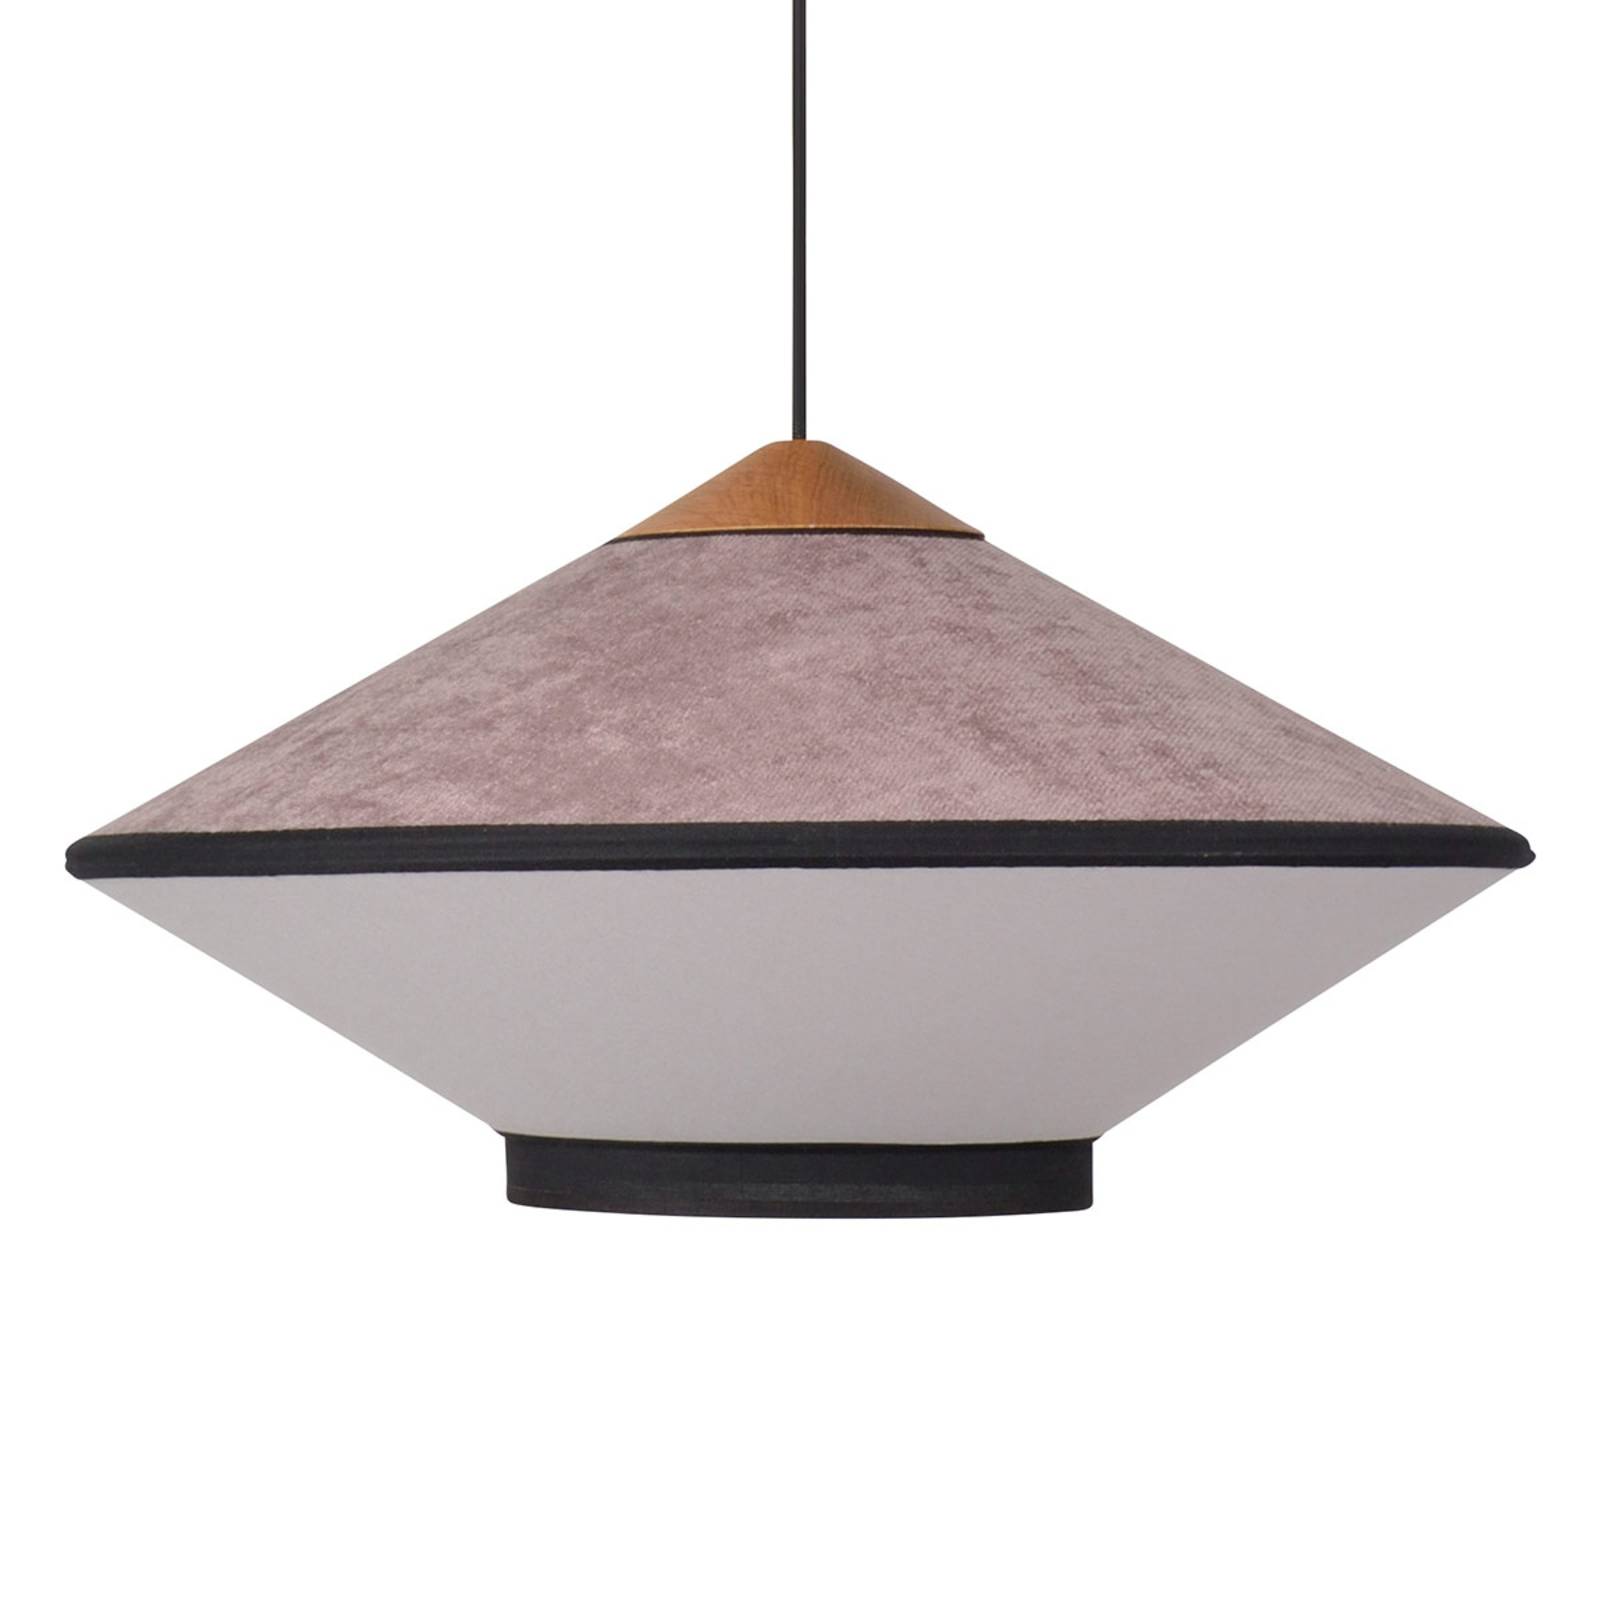 Forestier Cymbal S suspension 50 cm rose